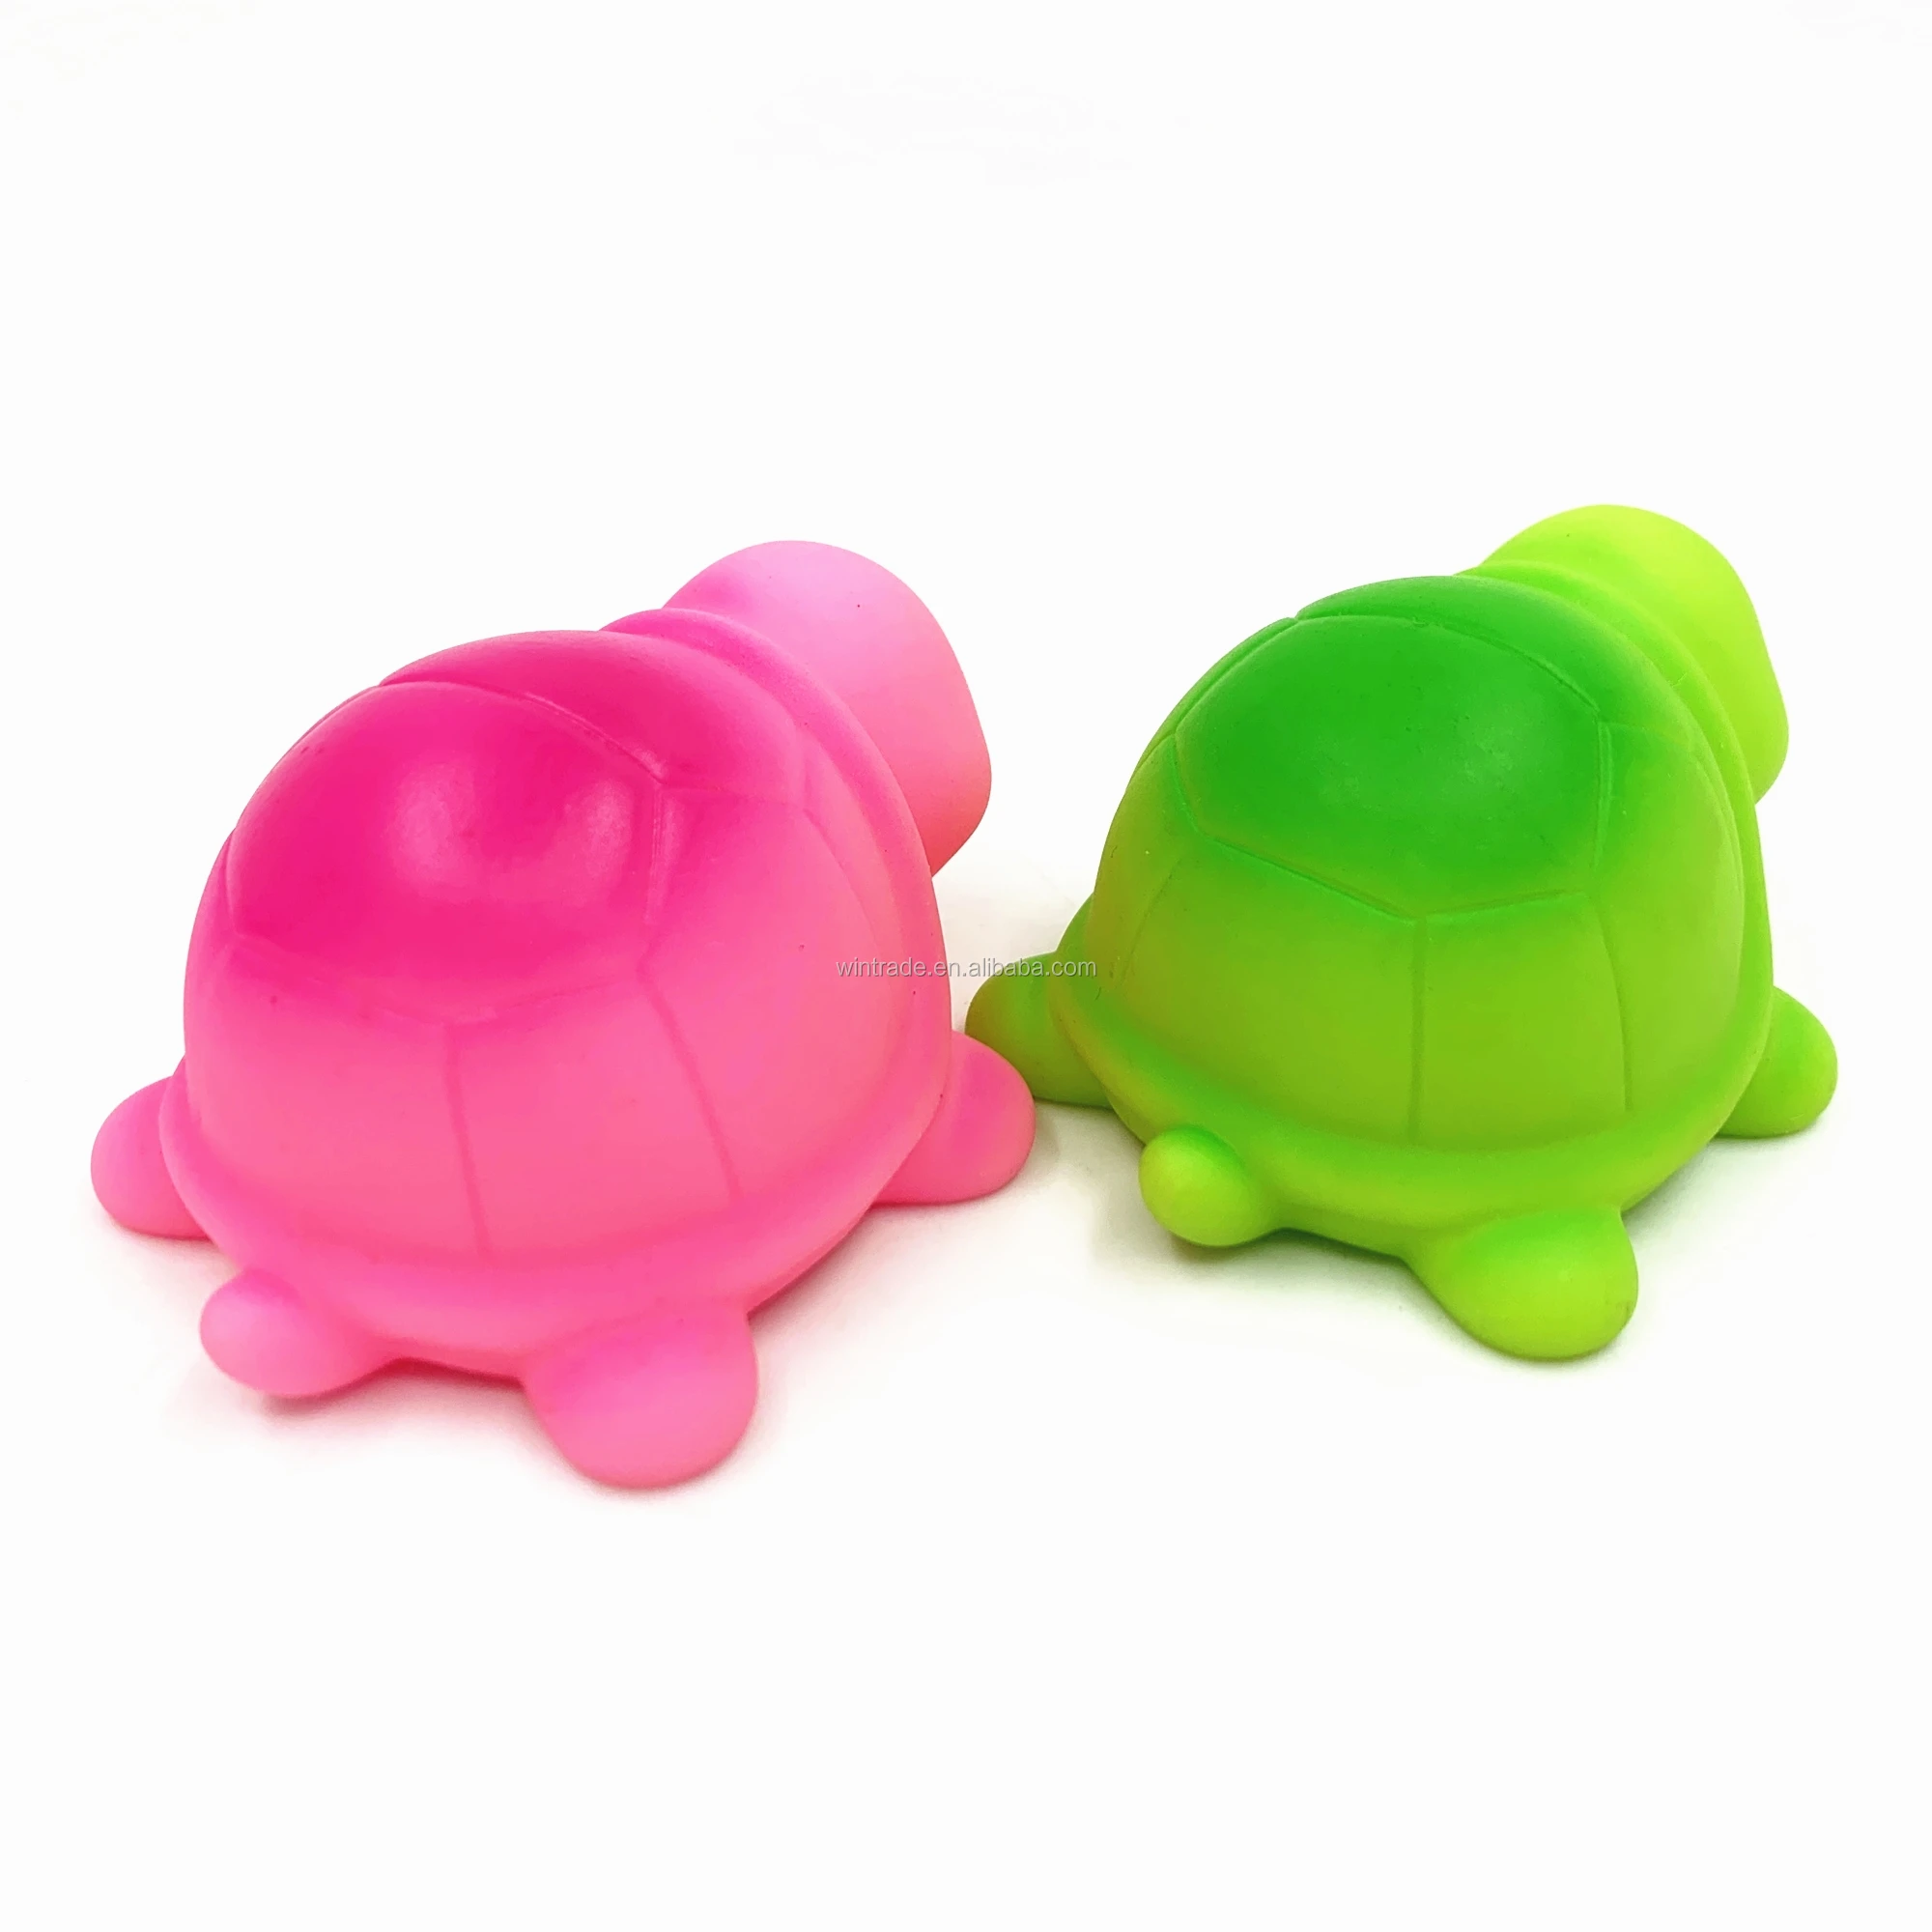 
Water sensor light up tortoise baby bath toys eco friendly shower toys play water in bathroom funny animals 